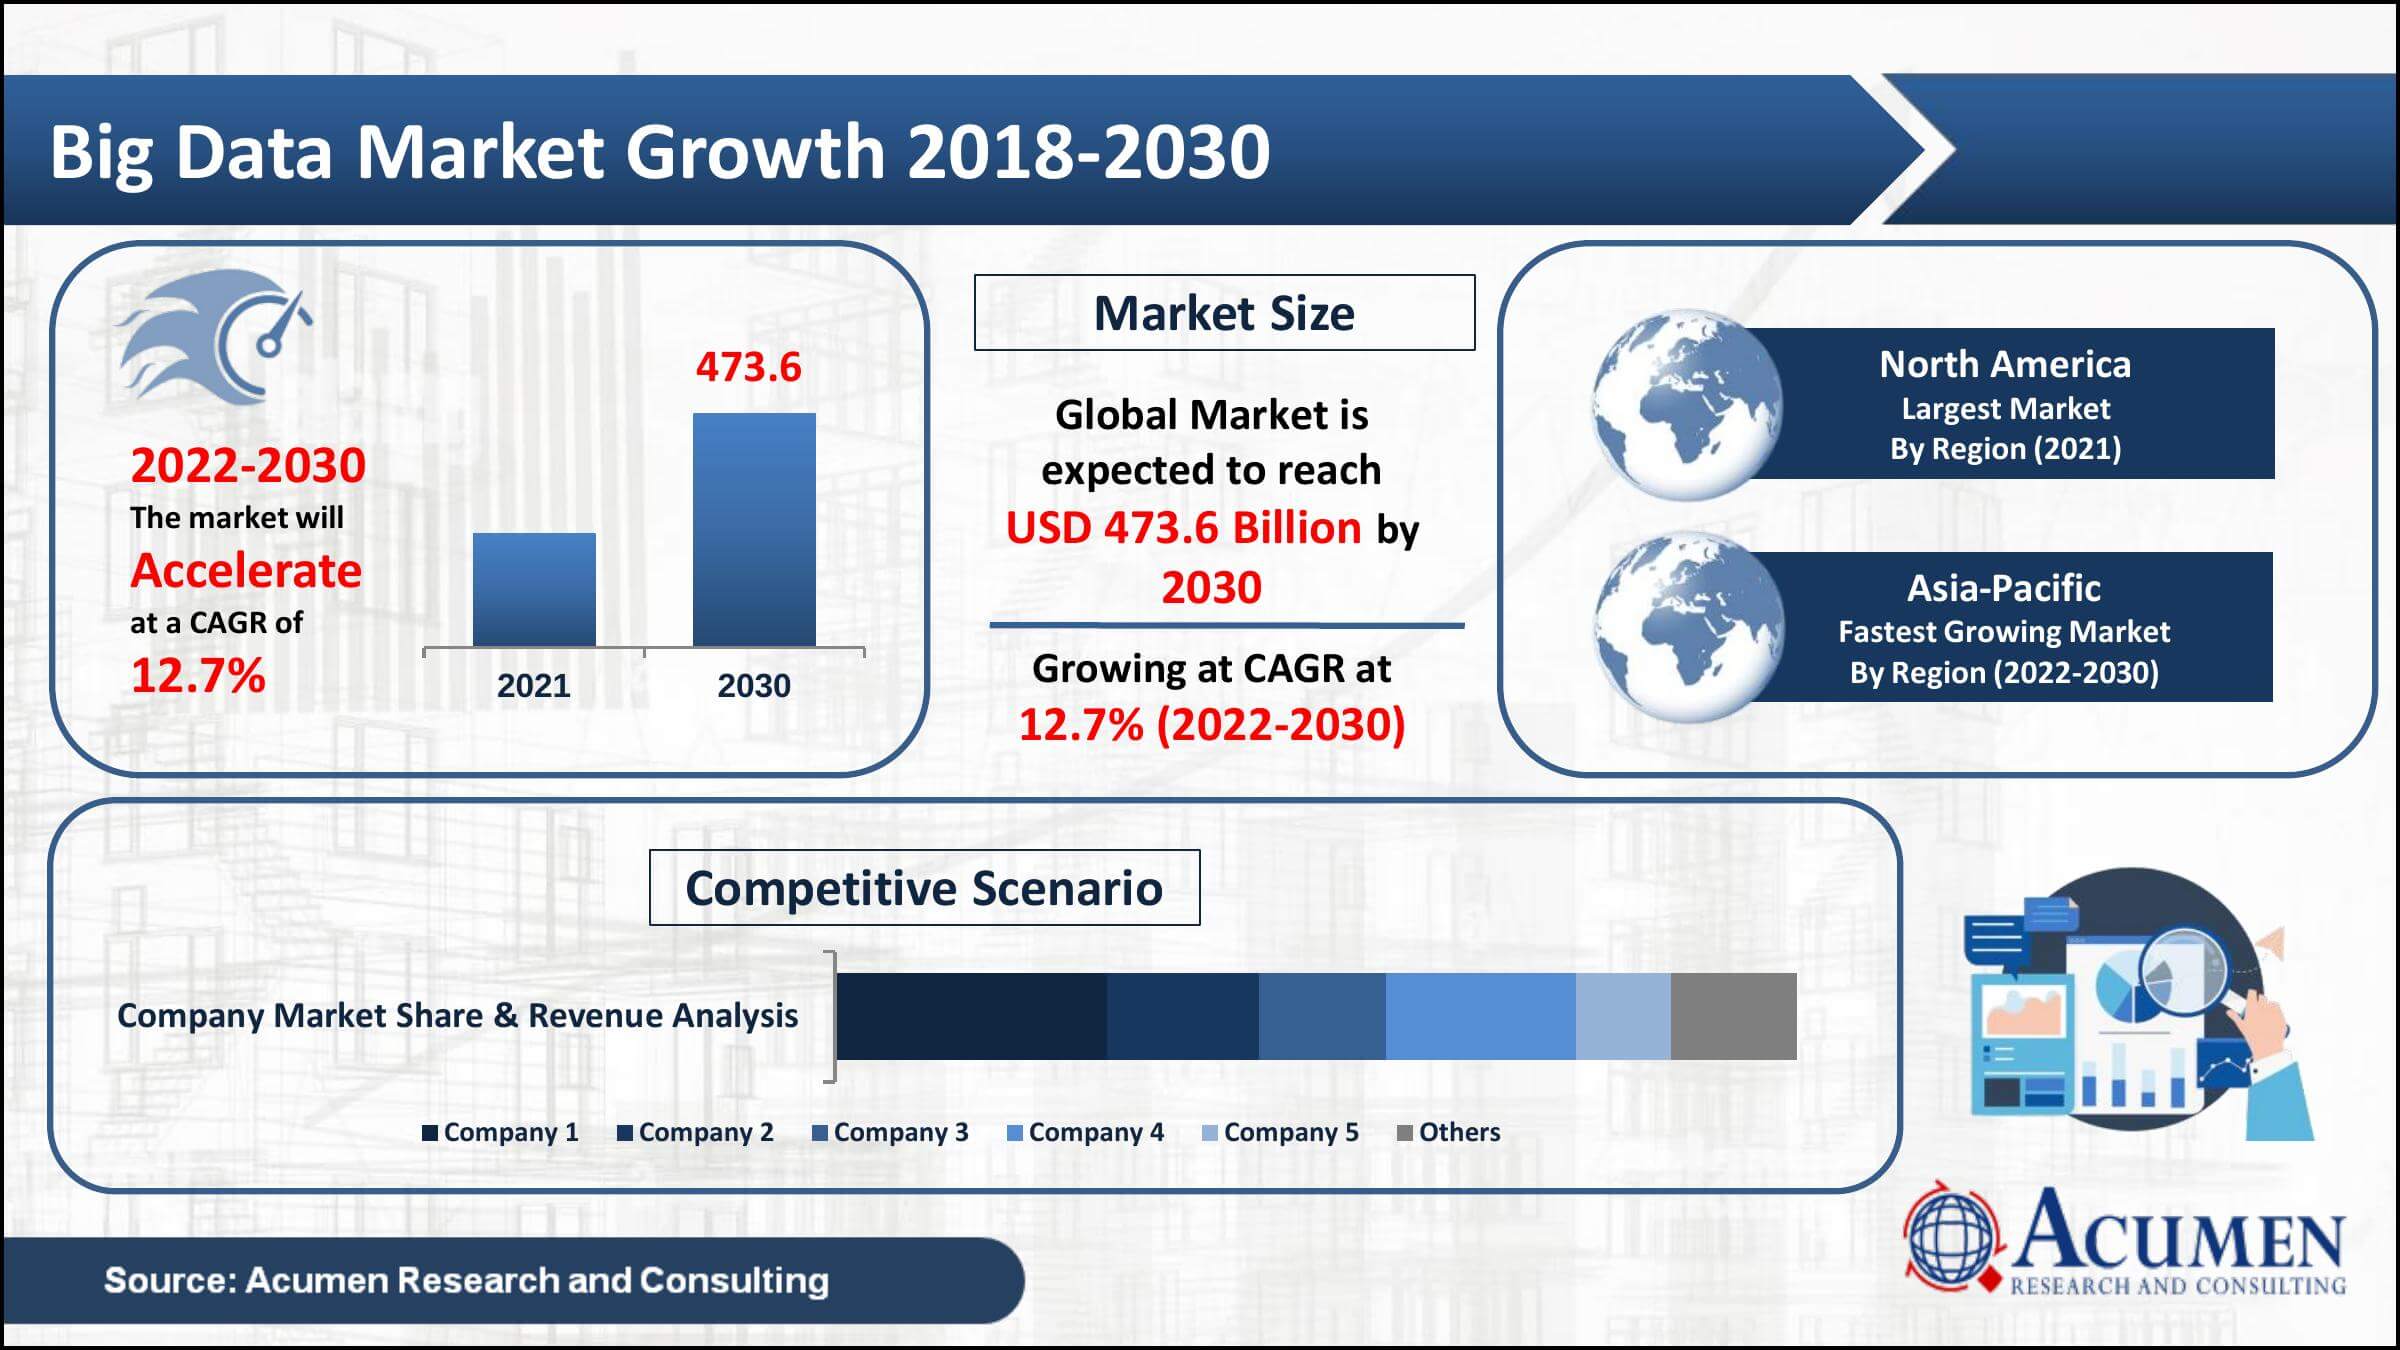 Big Data Market size is expected to reach USD 473.6 billion by 2030, growing at a CAGR of 12.7% from 2022 to 2030